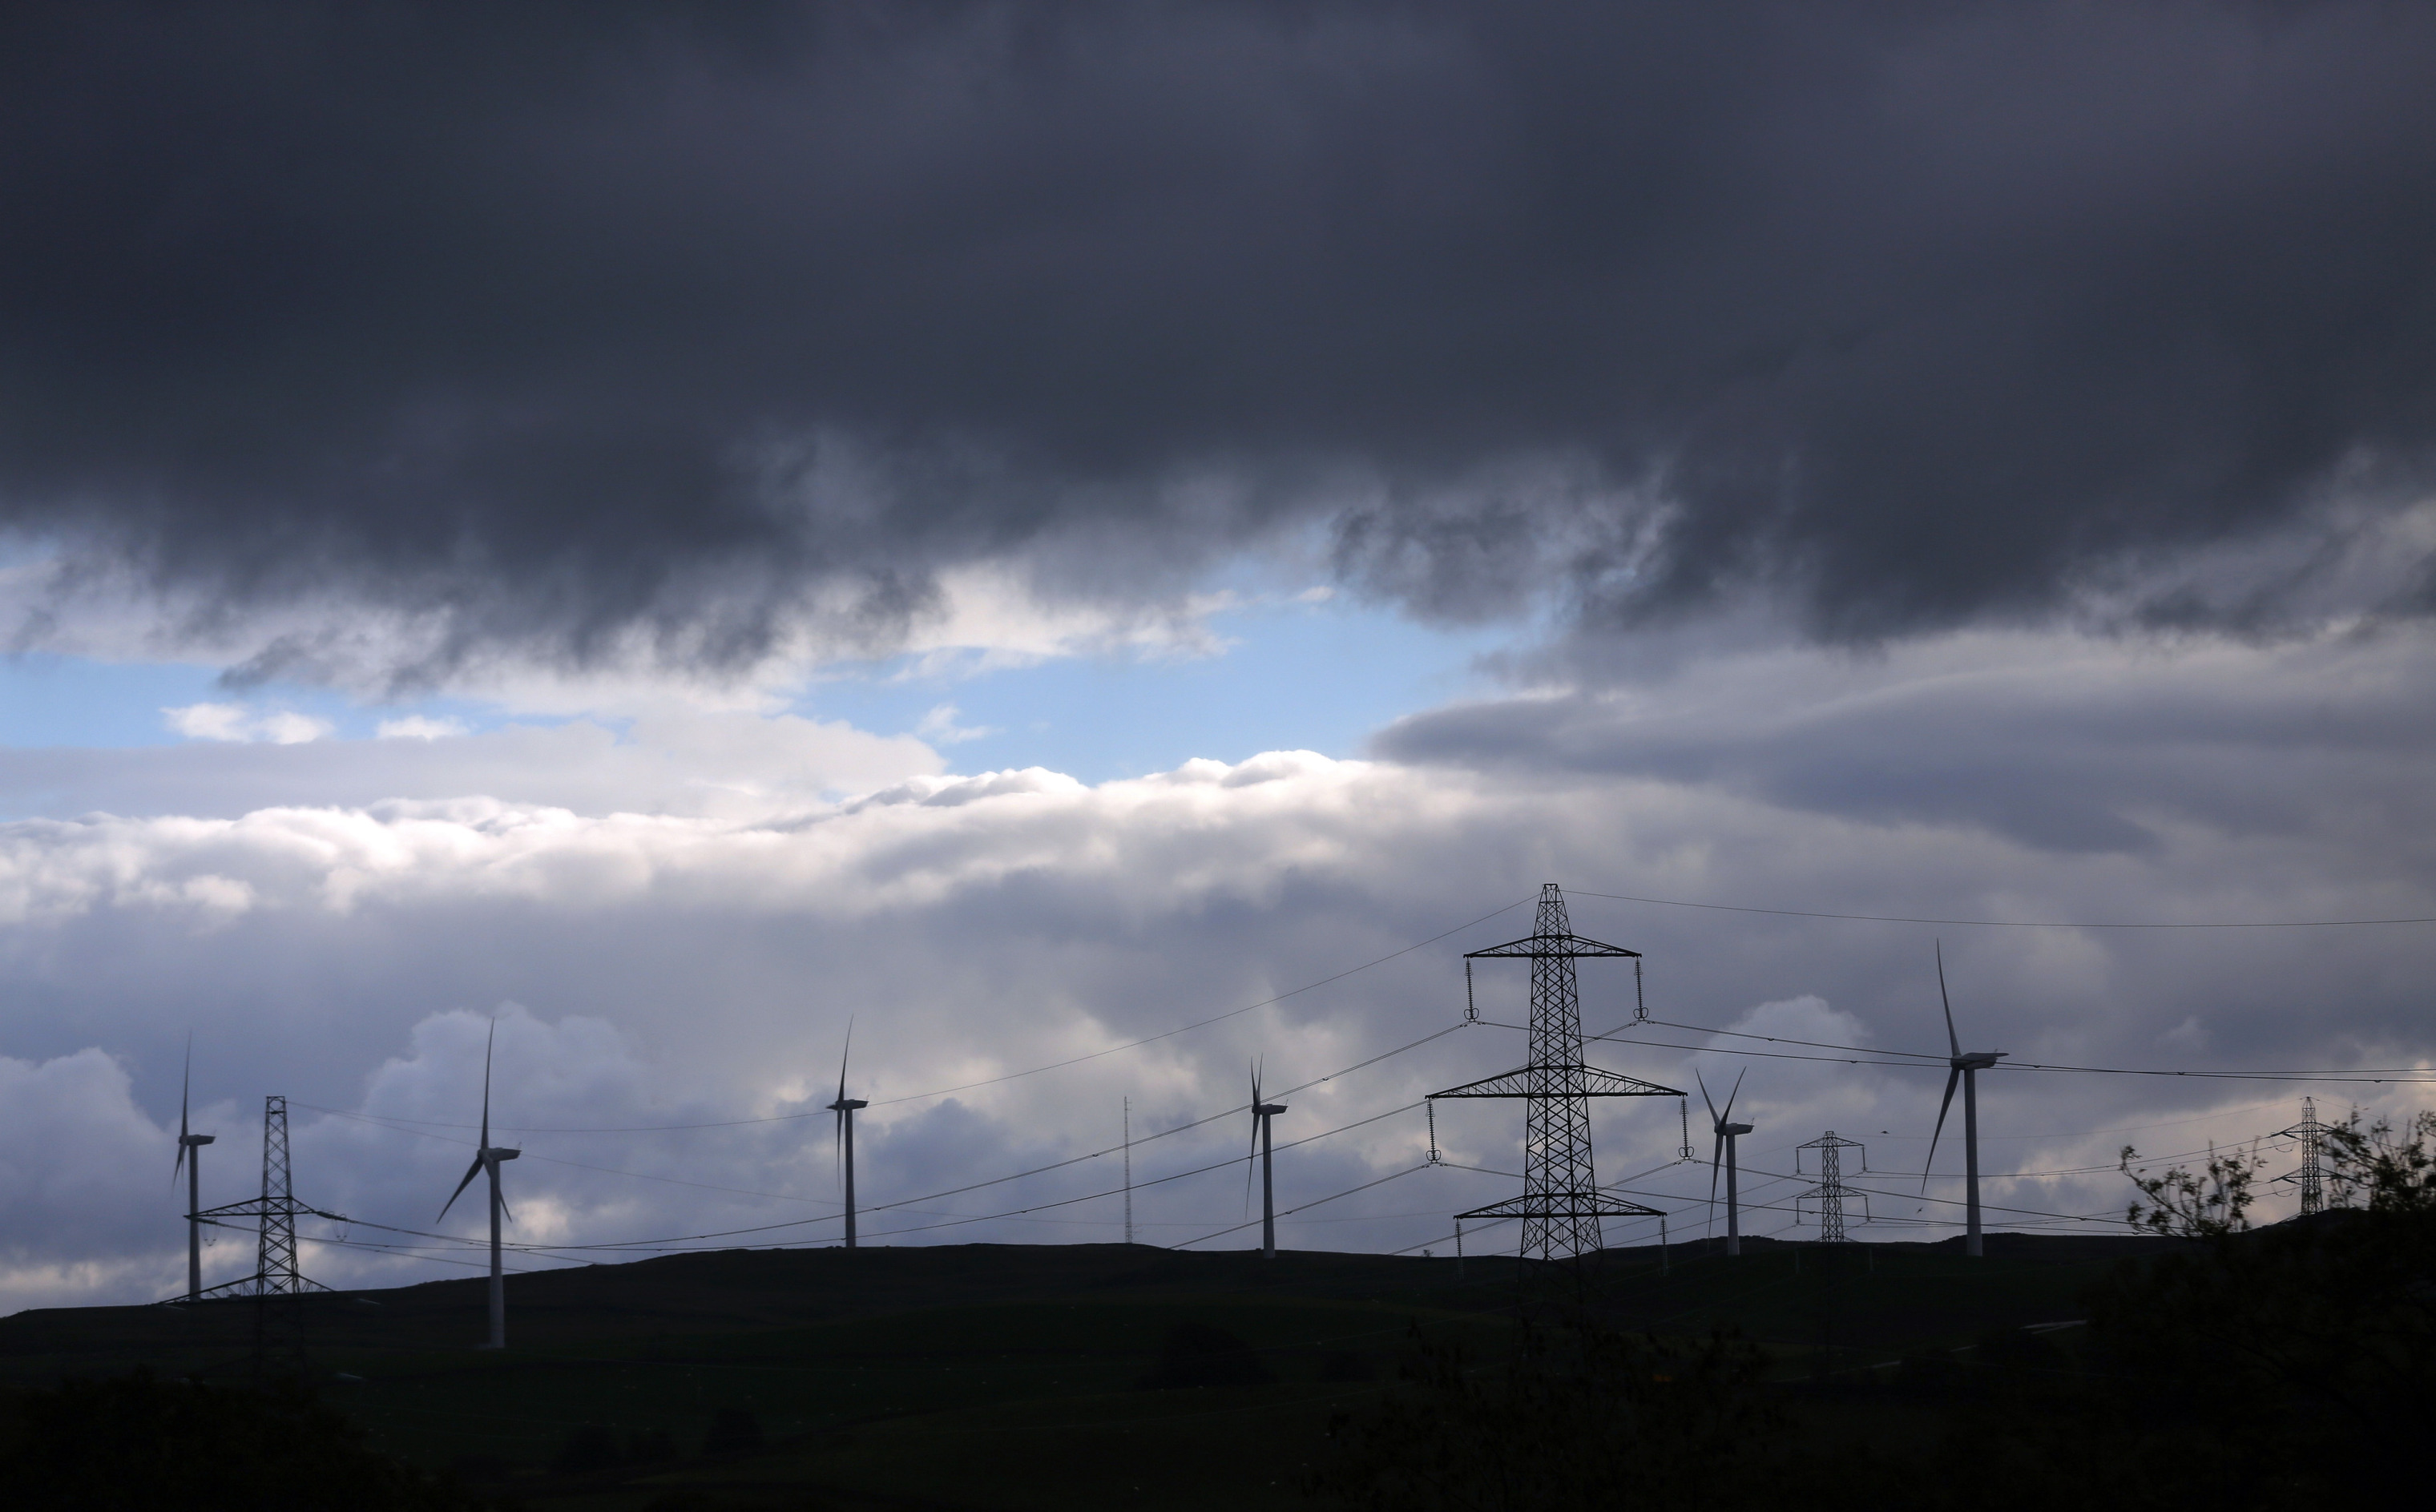 Wind turbines stand on the horizon near a National Grid Plc electricity pylons in Kendal, U.K. Photographer: Paul Thomas/Bloomberg